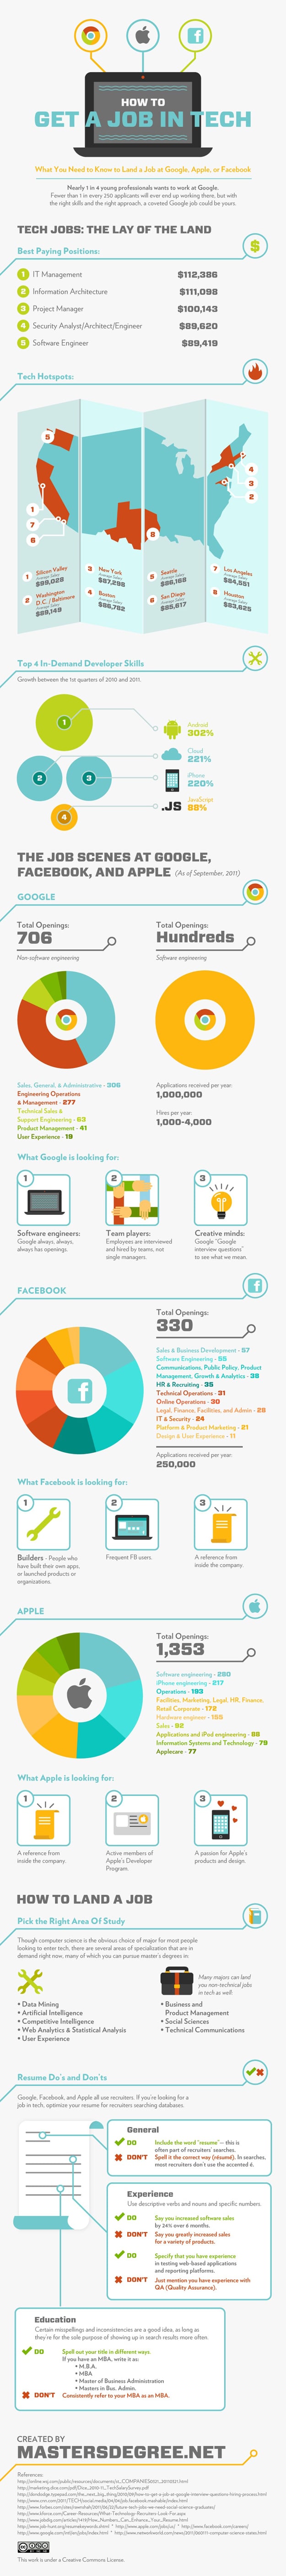 How To: Get A Job At Google, Apple or Facebook [Infographic]